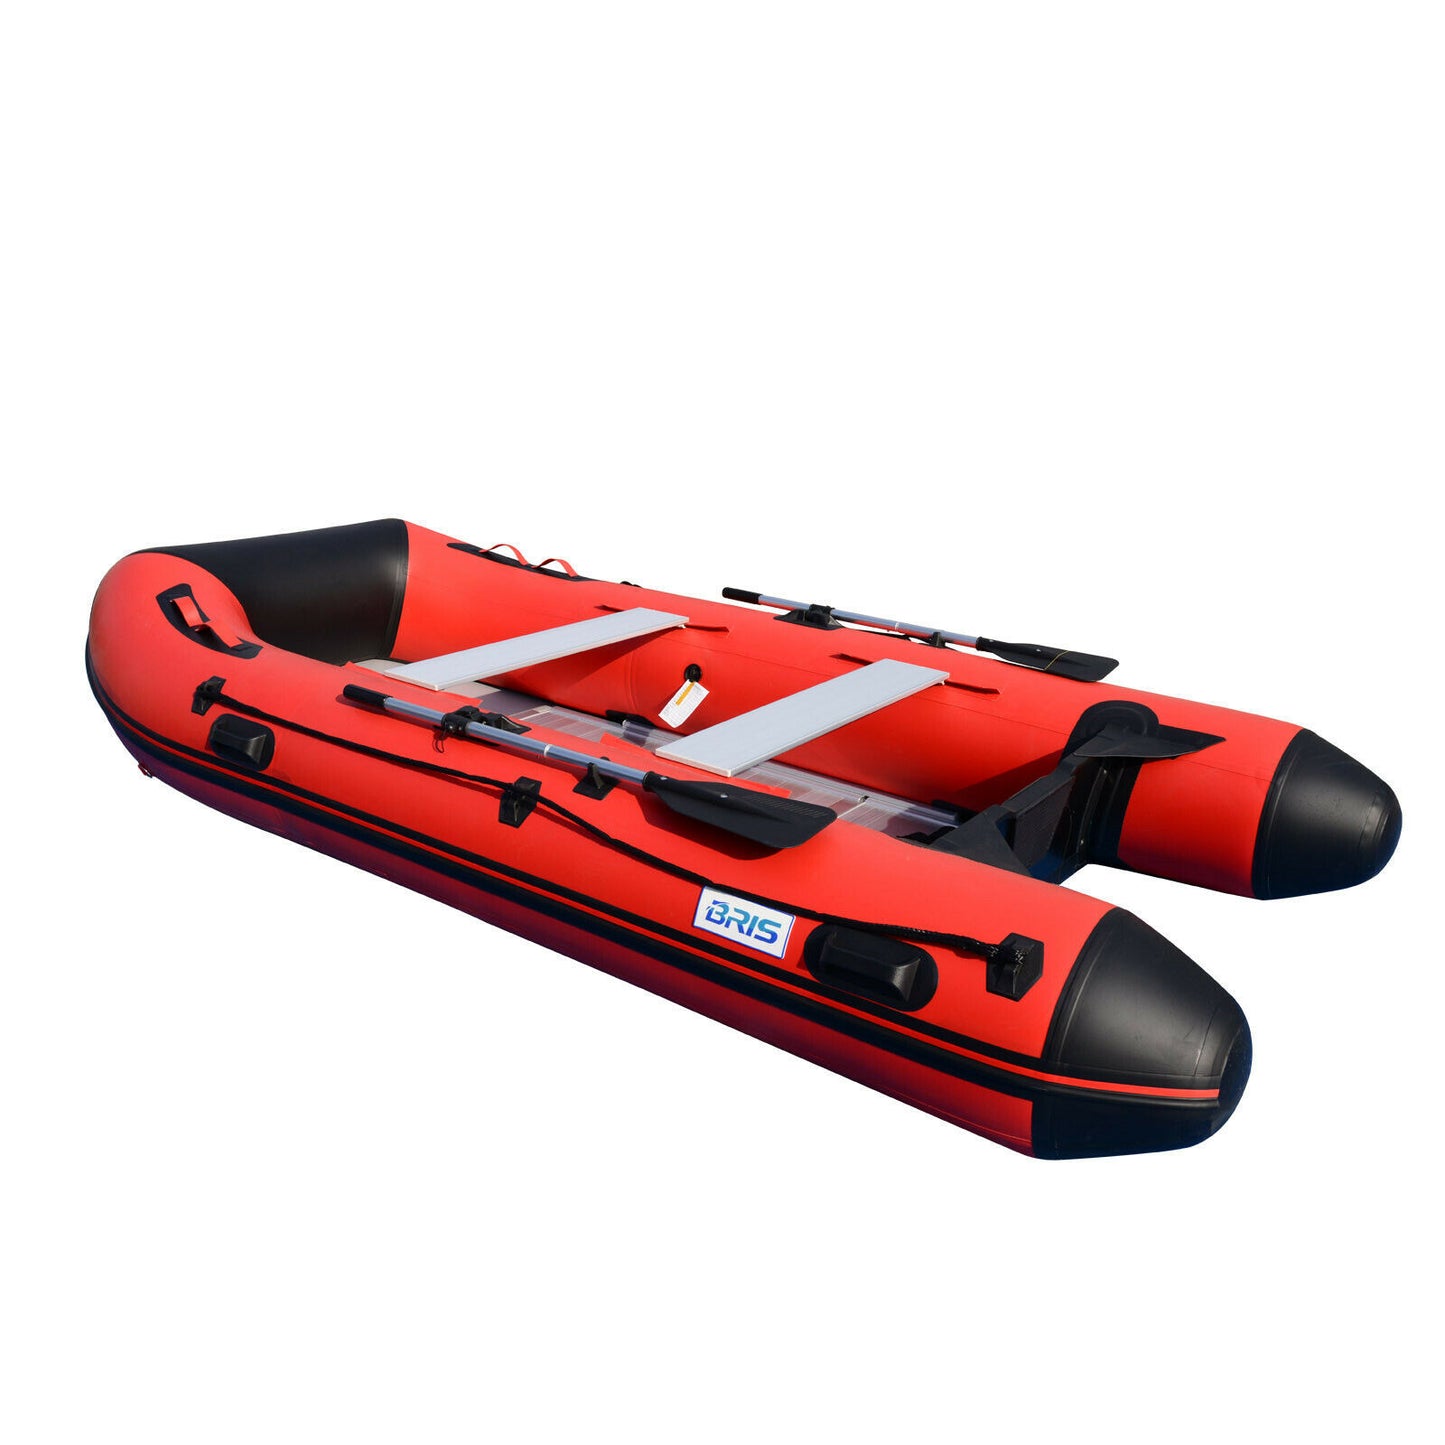 BRIS 12ft Inflatable Boat Dinghy Raft Pontoon Rescue & Dive Raft Fishing Boat